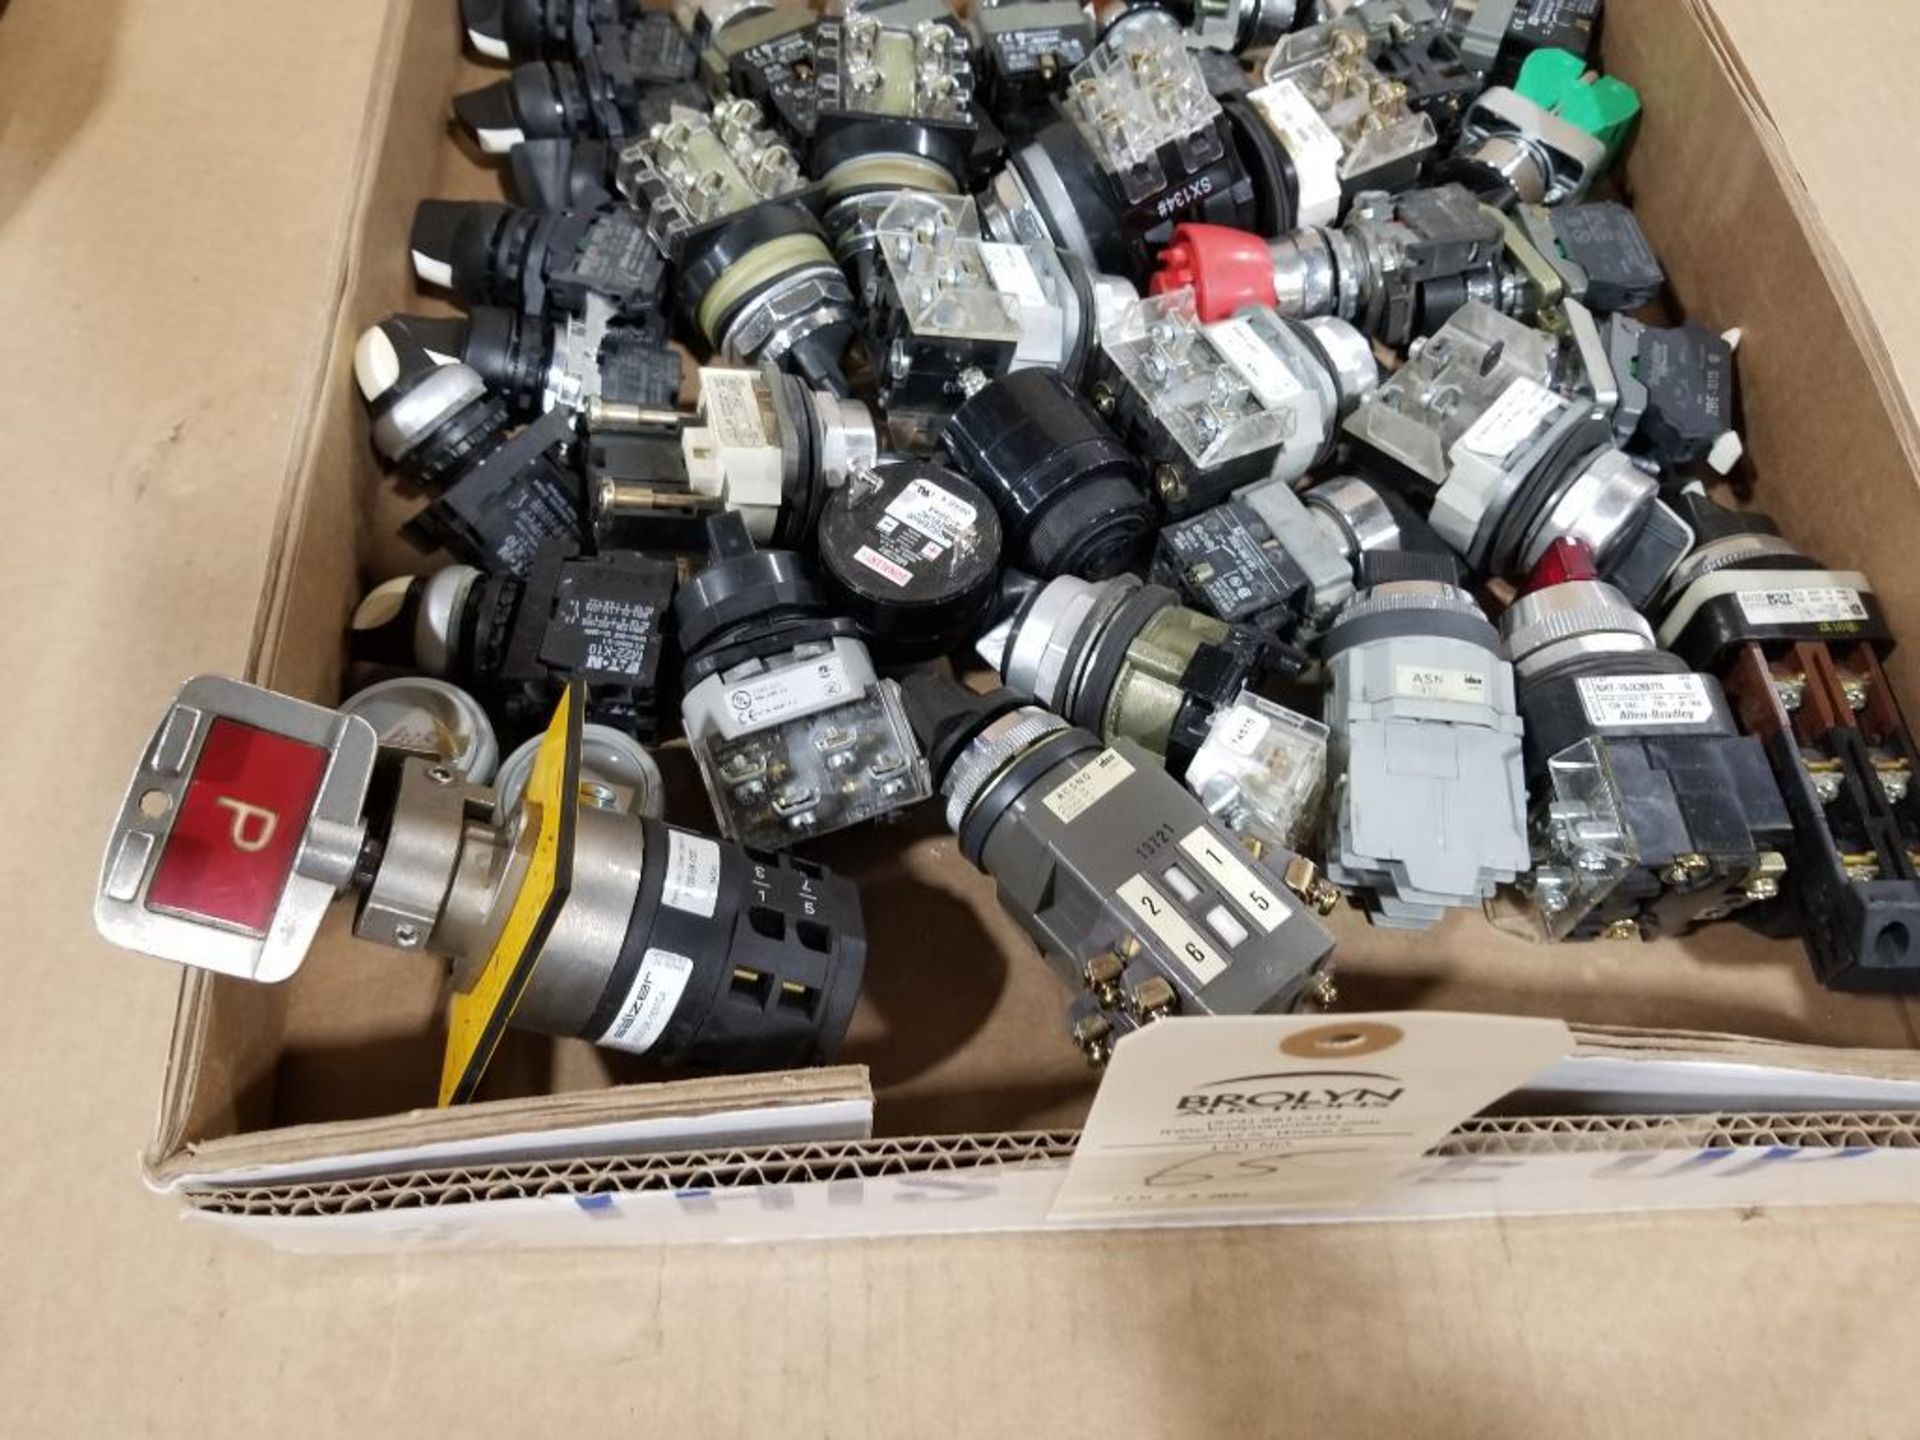 Large assortment of push buttons, pilot lots, switches, etc. - Image 14 of 16